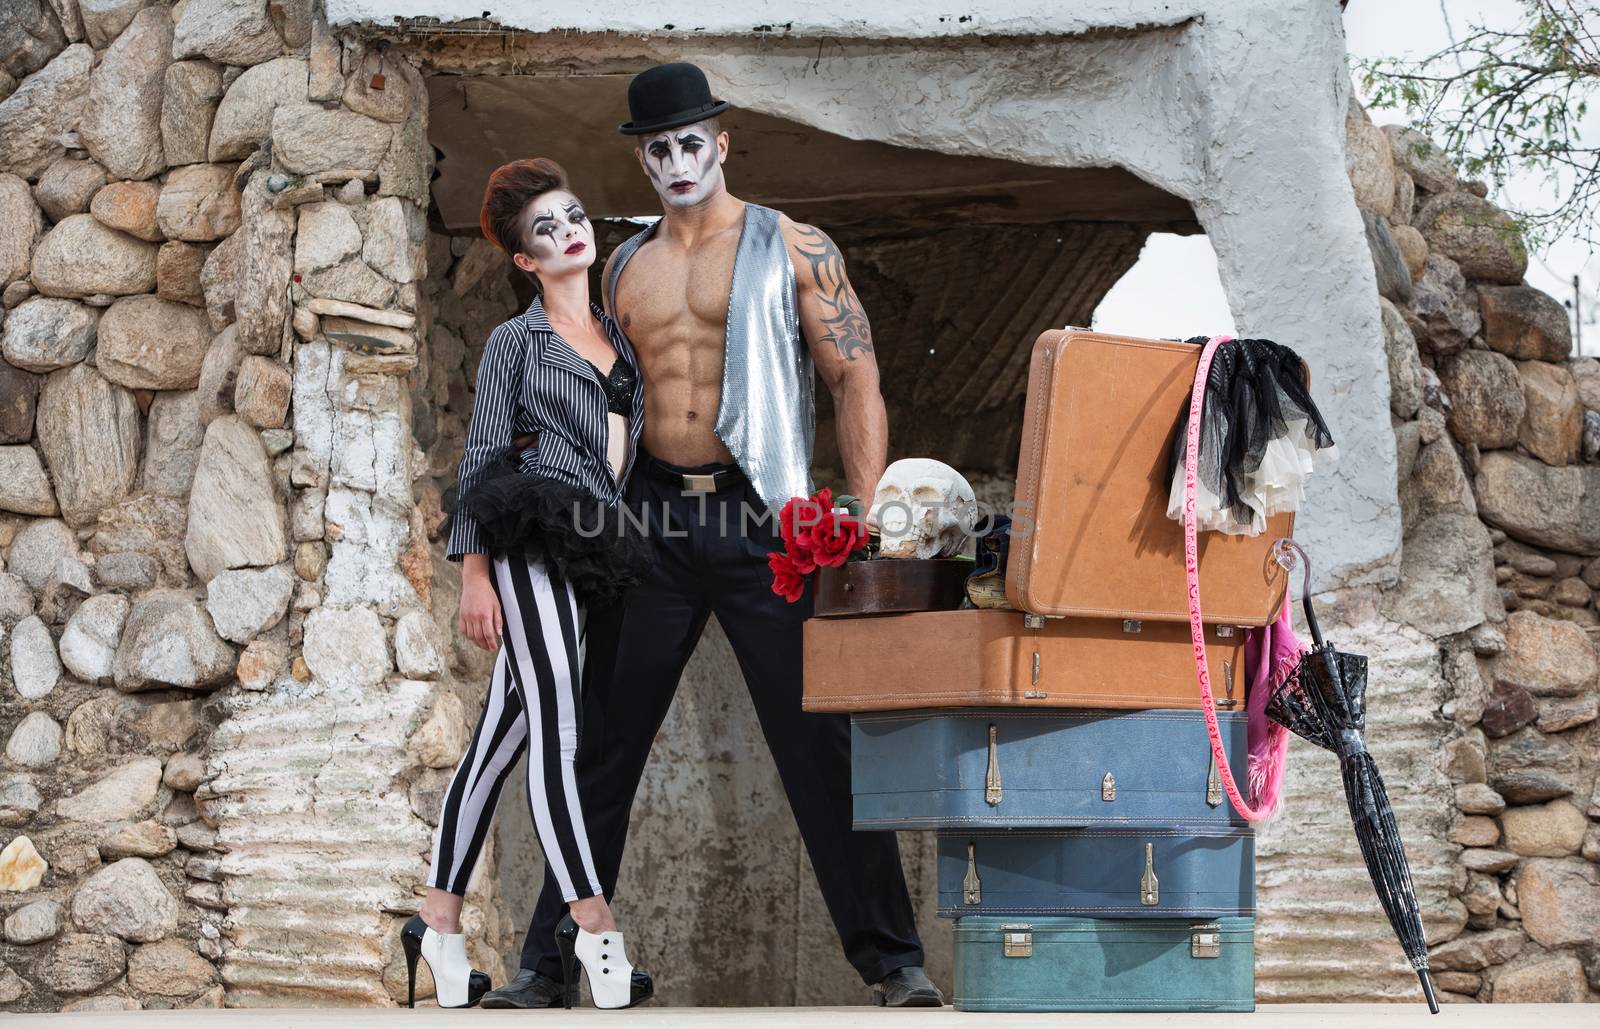 Muscular cirque performer with bizarre female partner in striped pants